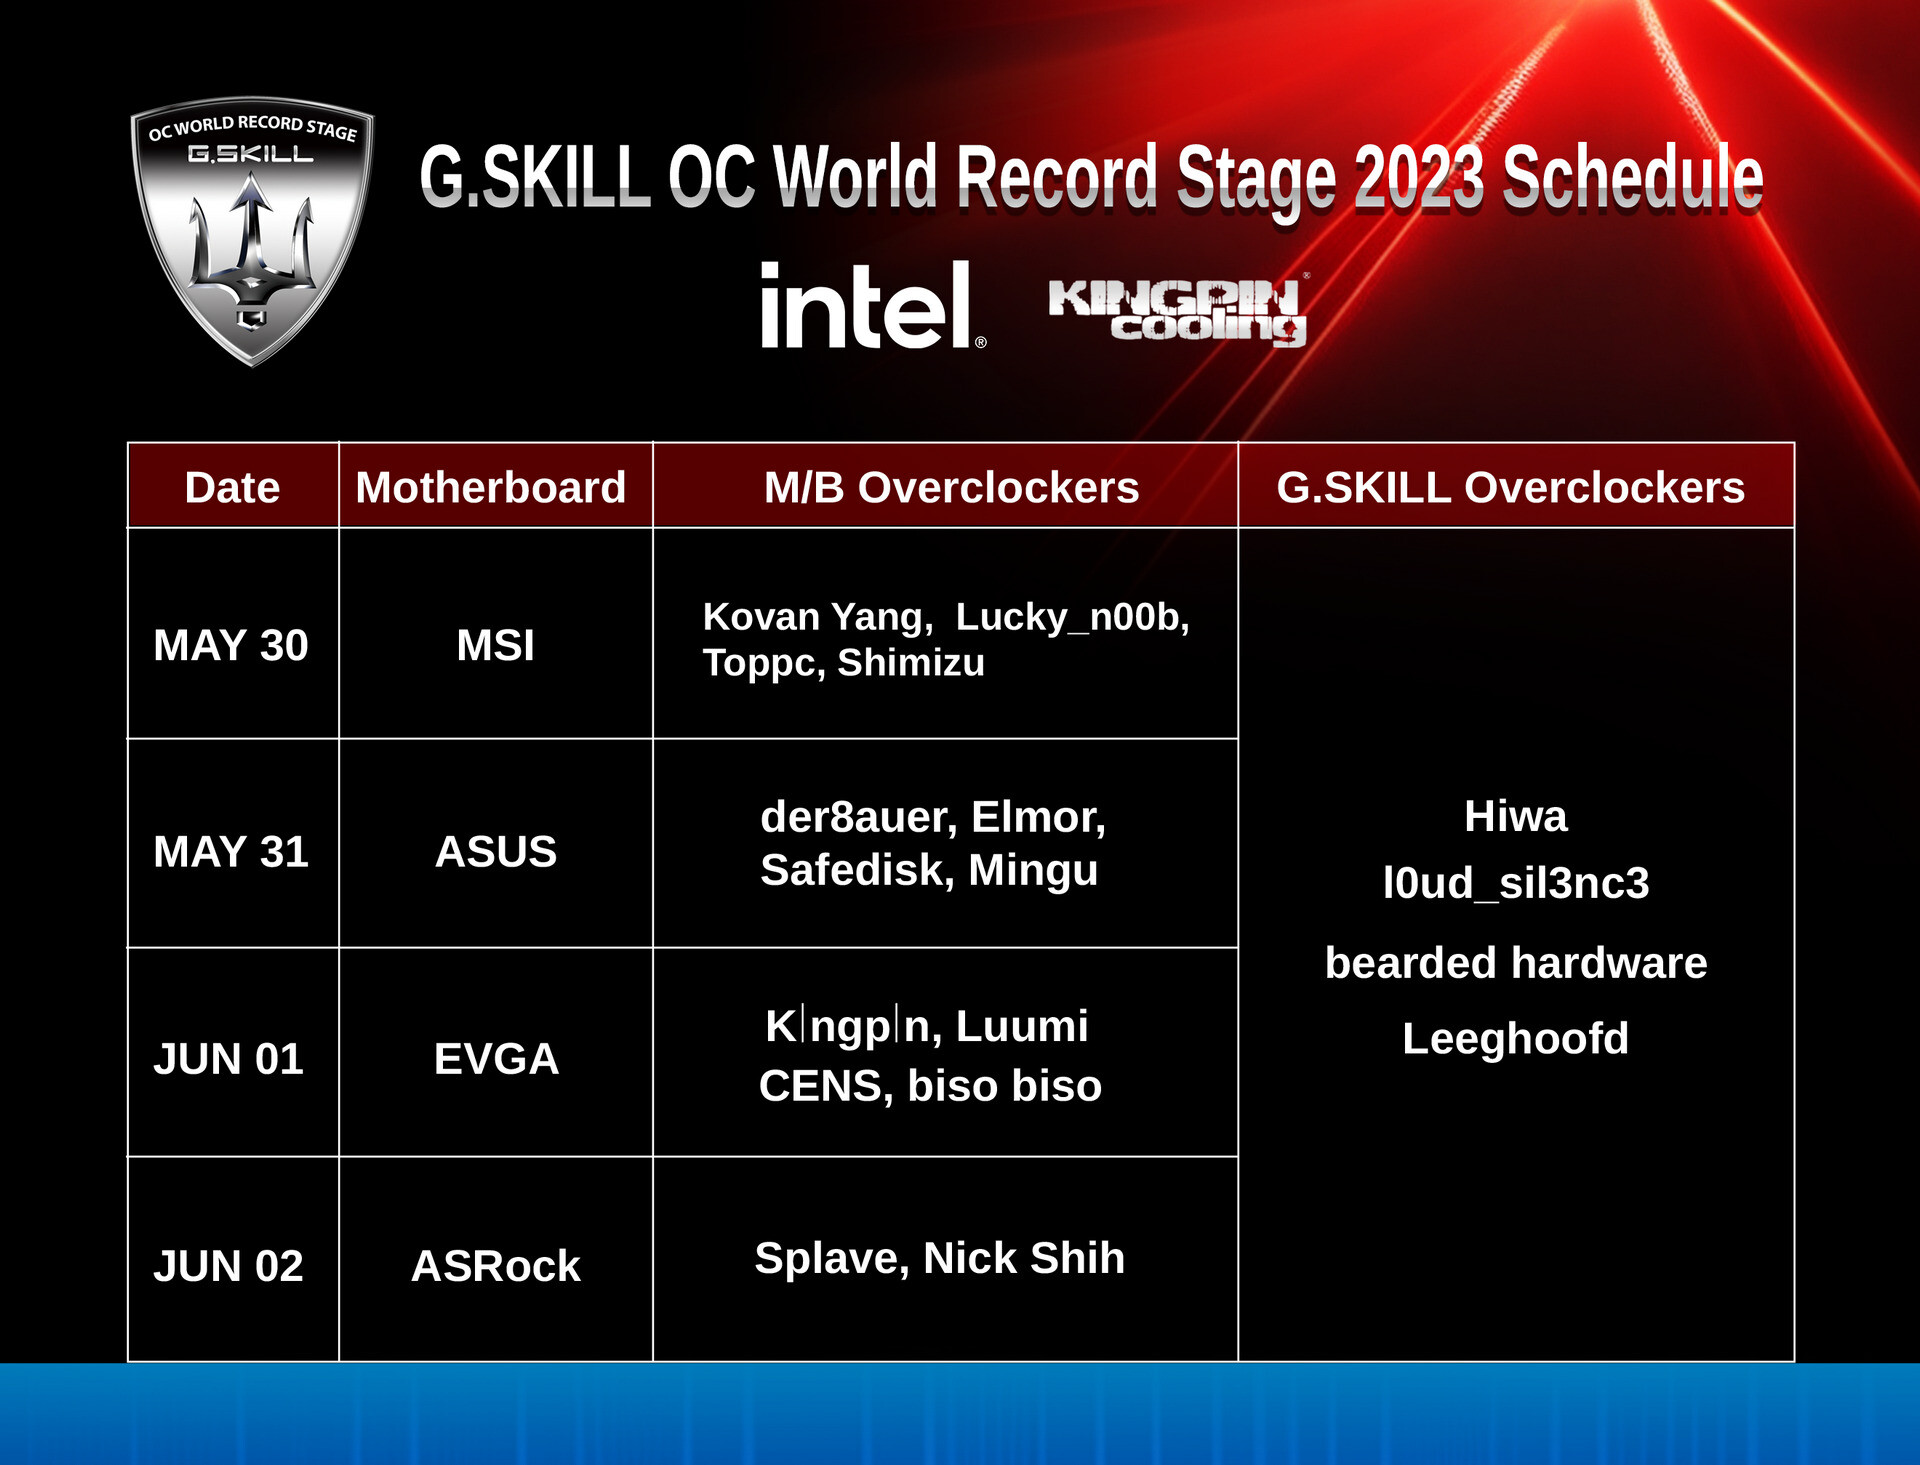 G.SKILL to Showcase New Products and Host Highly Anticipated Overclocking Events - returnal